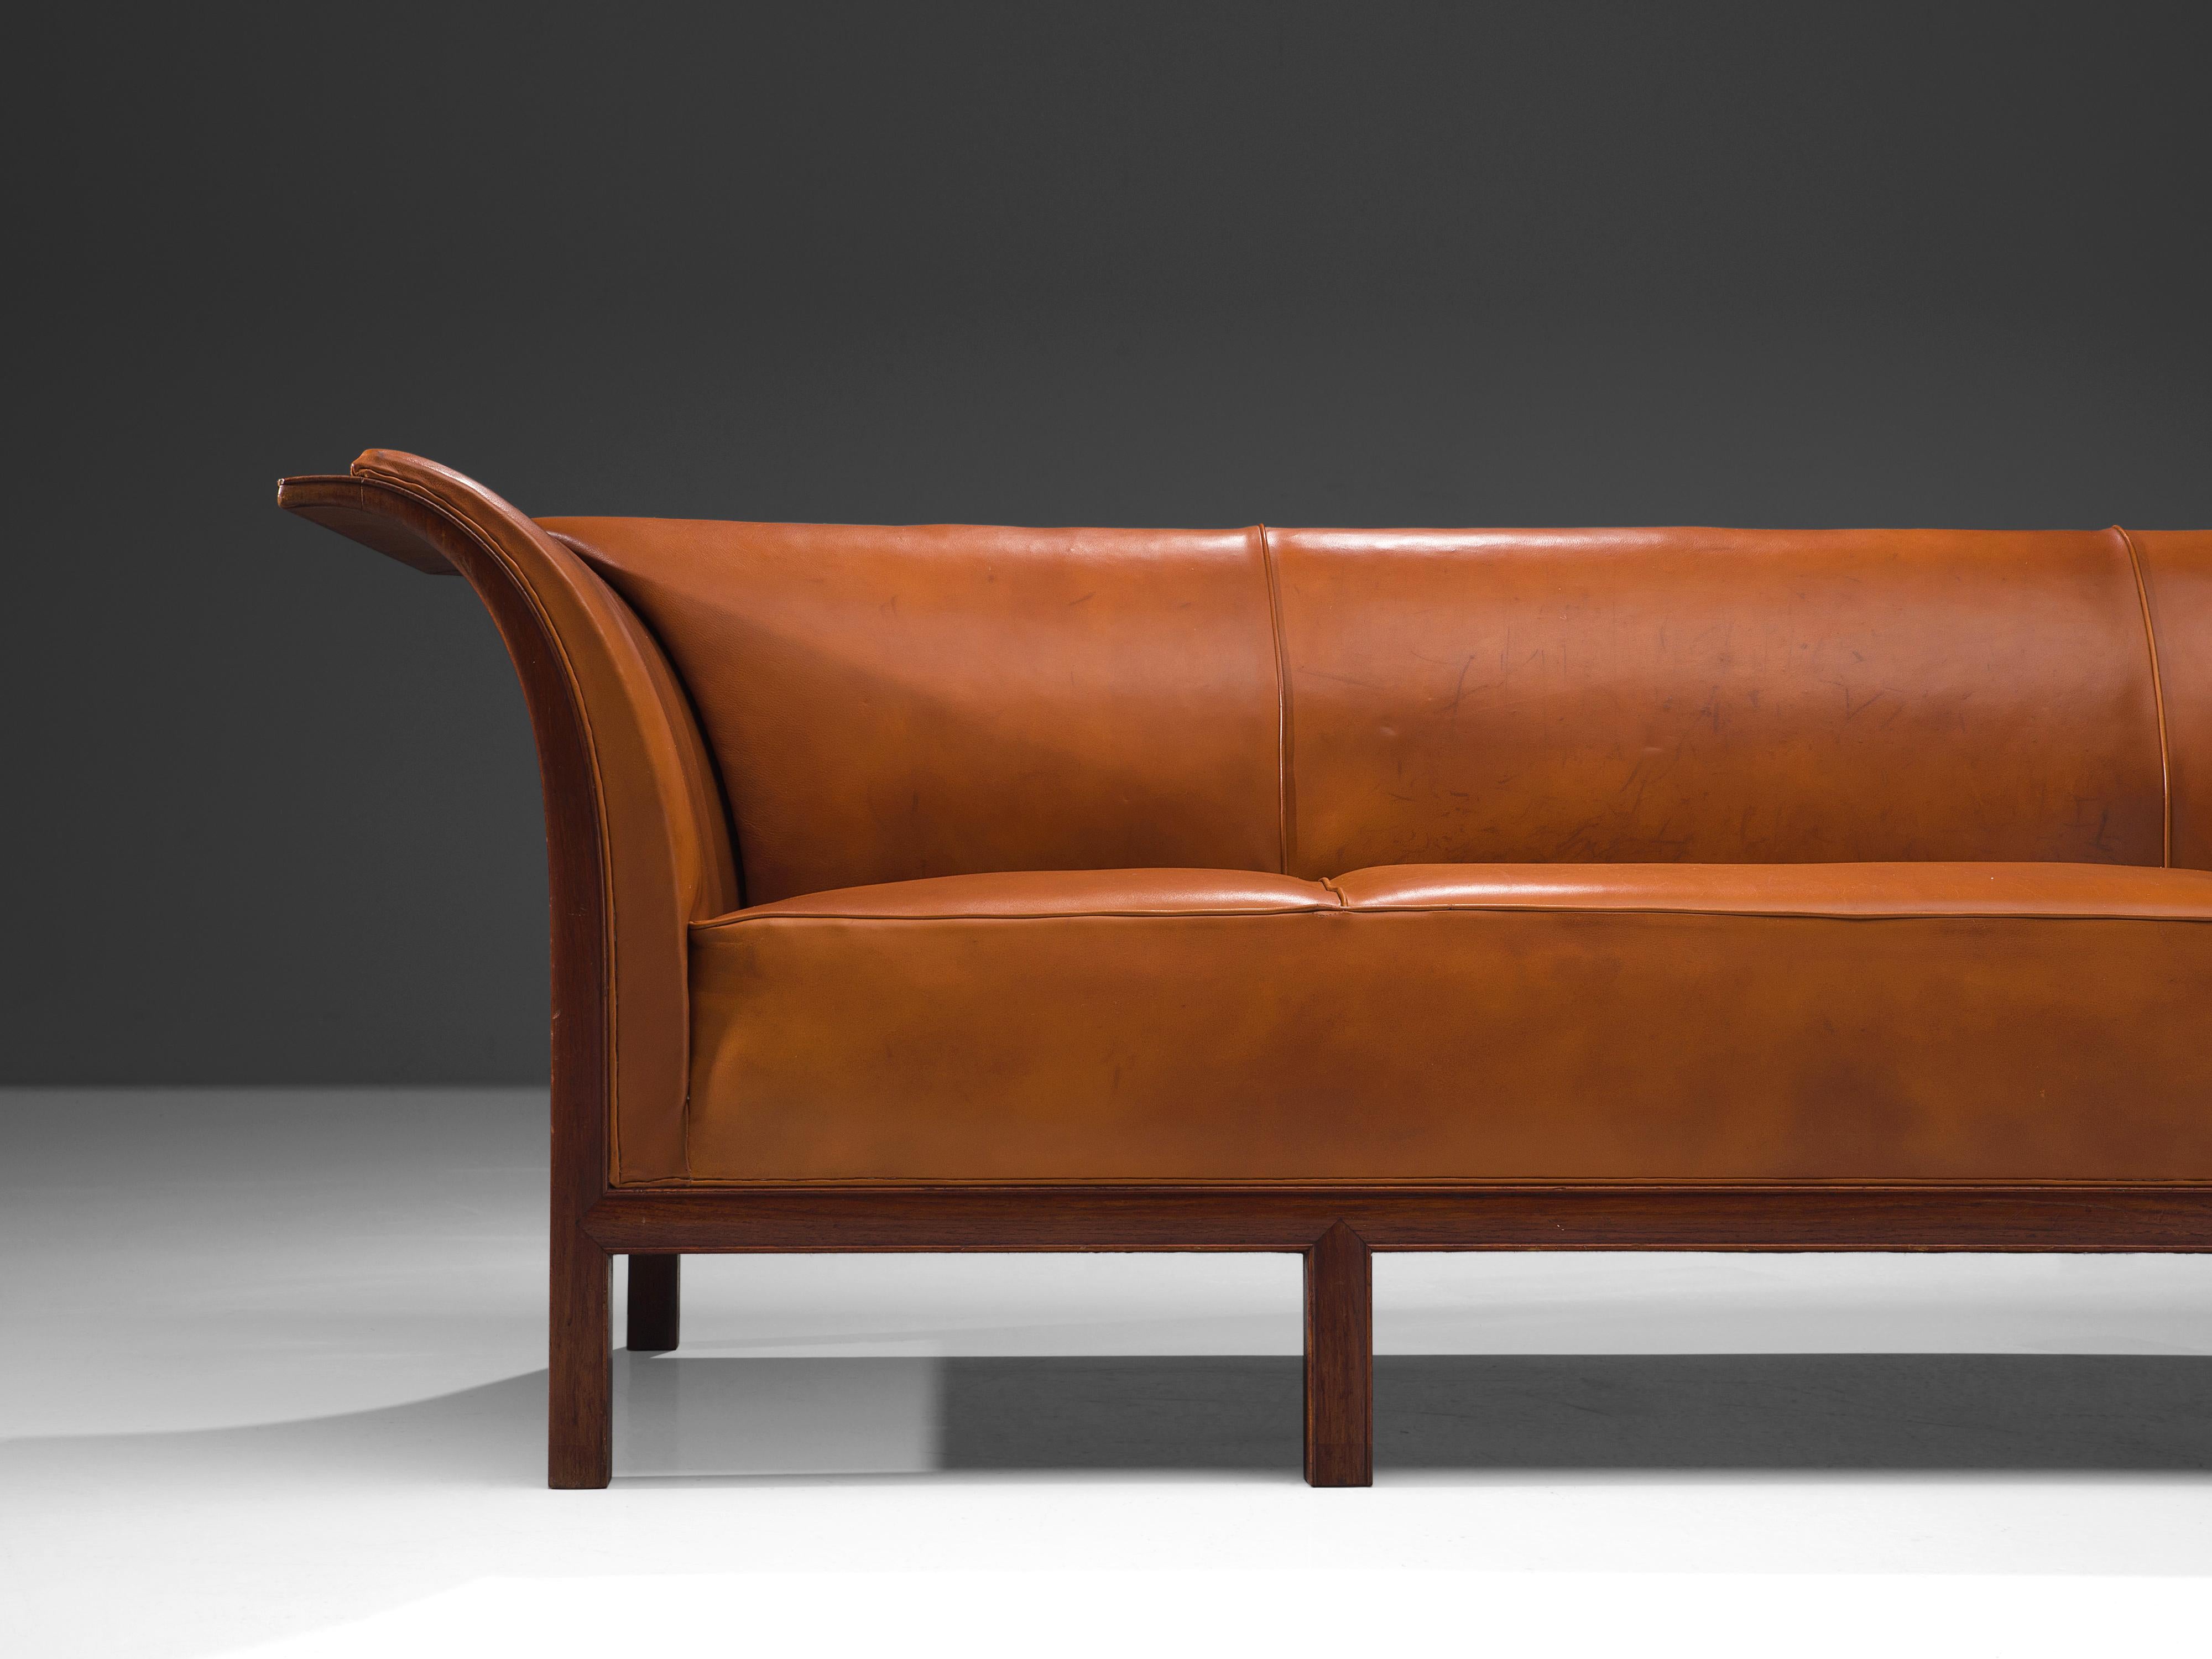 Patinated Frits Henningsen Sofa in Teak and Cognac Leather